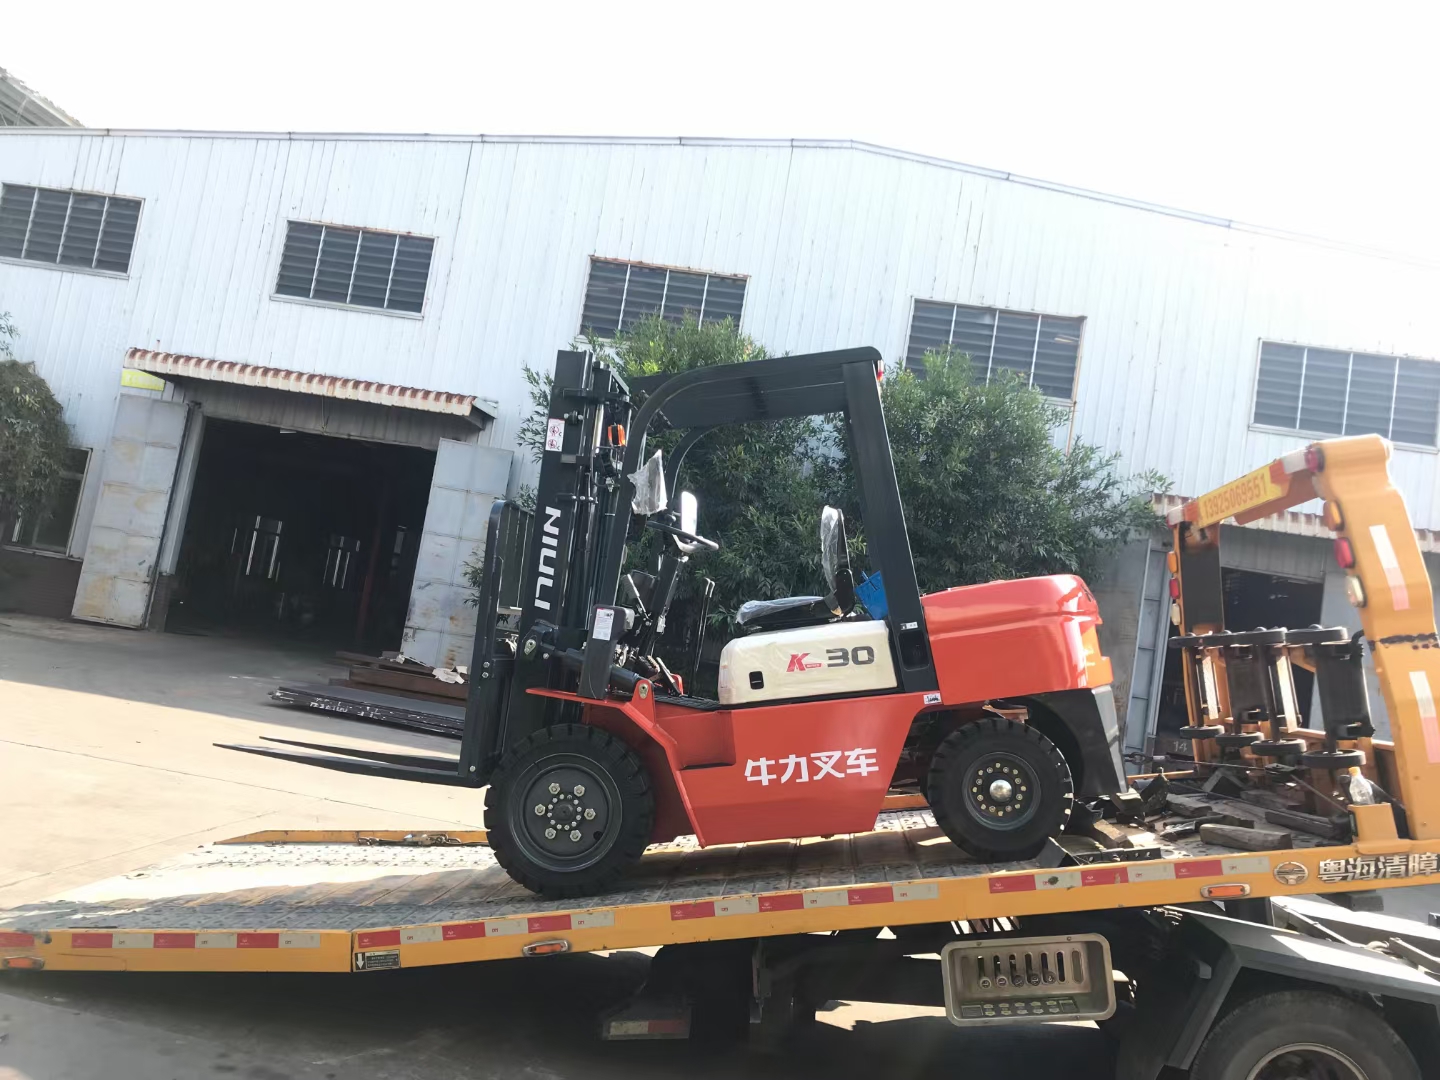 NIULI Manual pallet stacker 3 ton hydraulic manual hand portable stacker  forklift for sale china - Buy Heavy Duty Manual Forklift, portable stacker  forklift, portable stacker Product on NIULI machinery manufacture Co.,Ltd